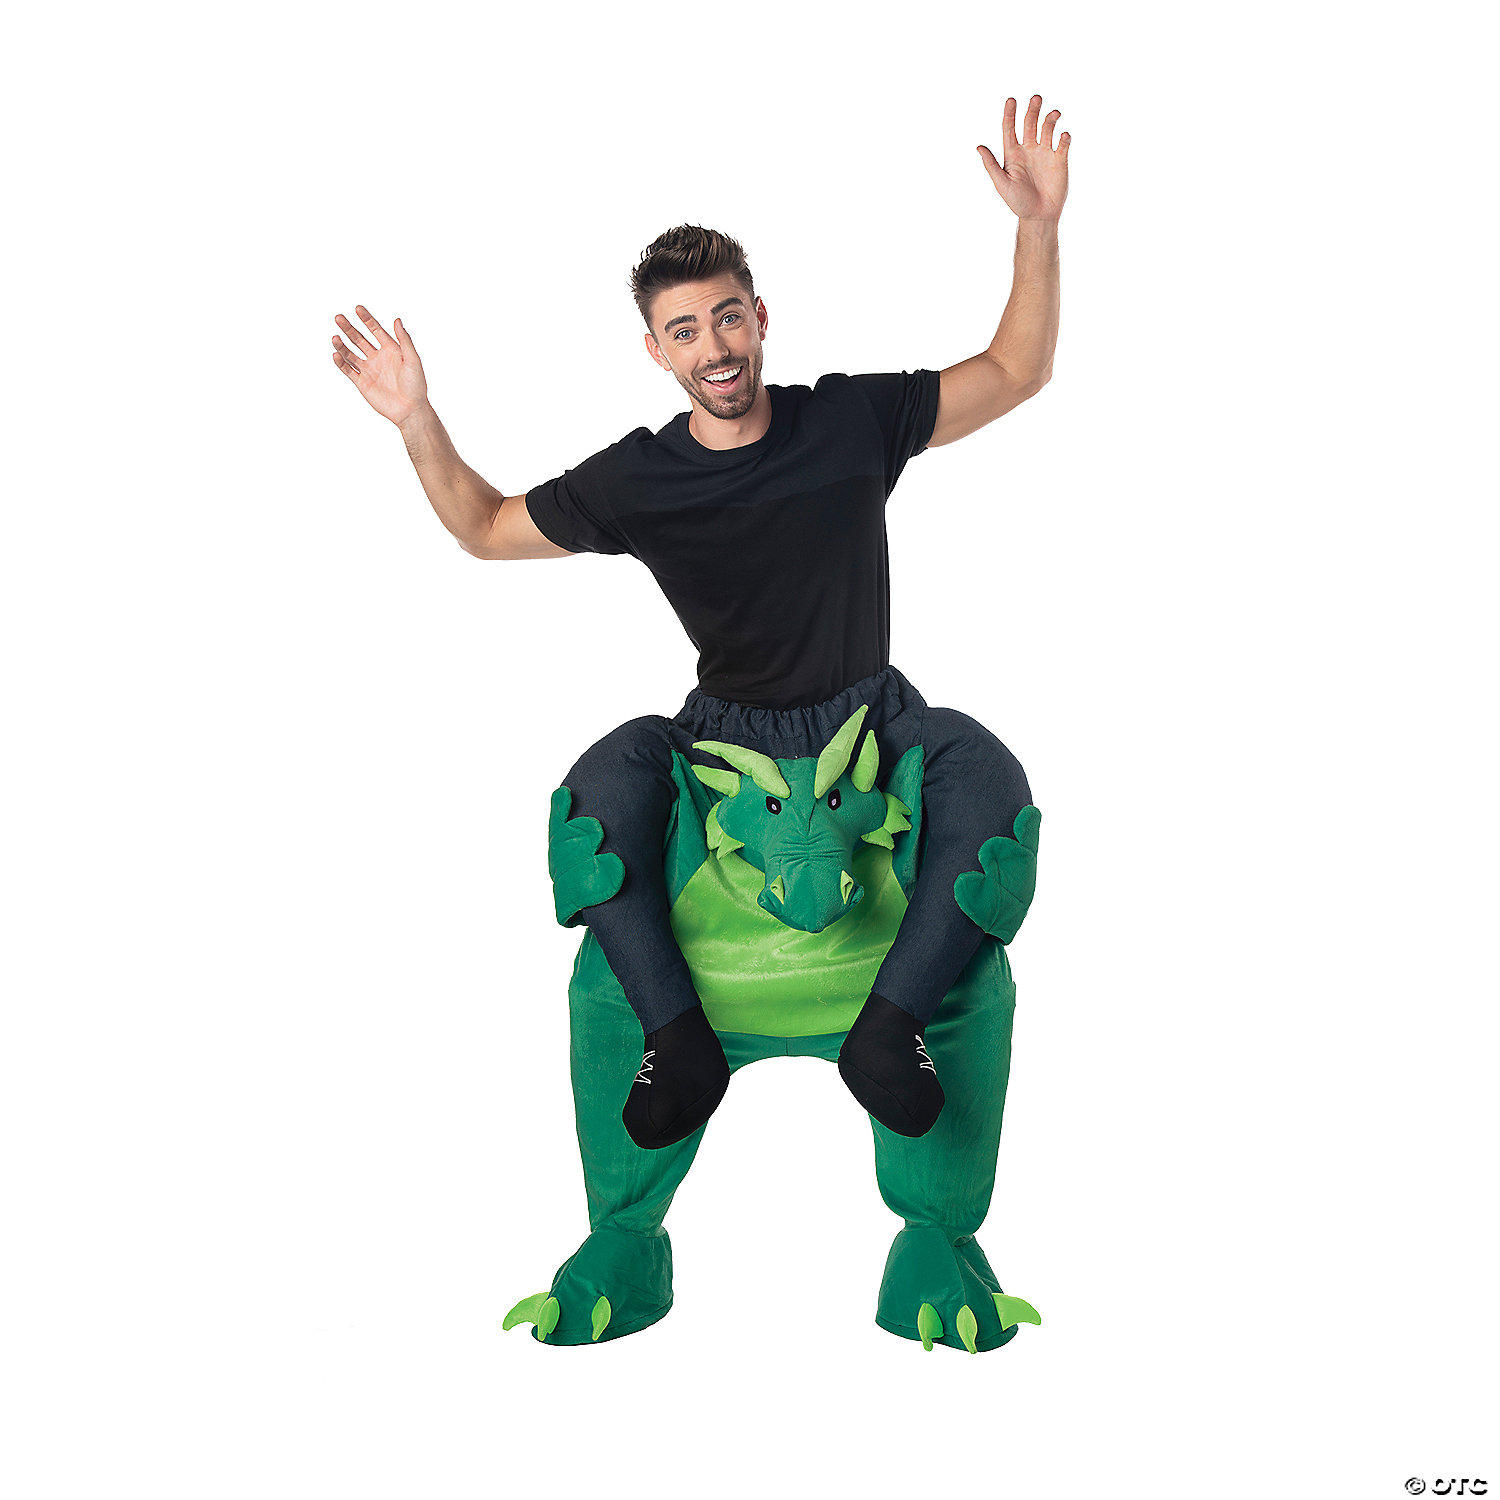 Picture of Seasonal Visions MR148603 Carry Me Dragon Adult Costume